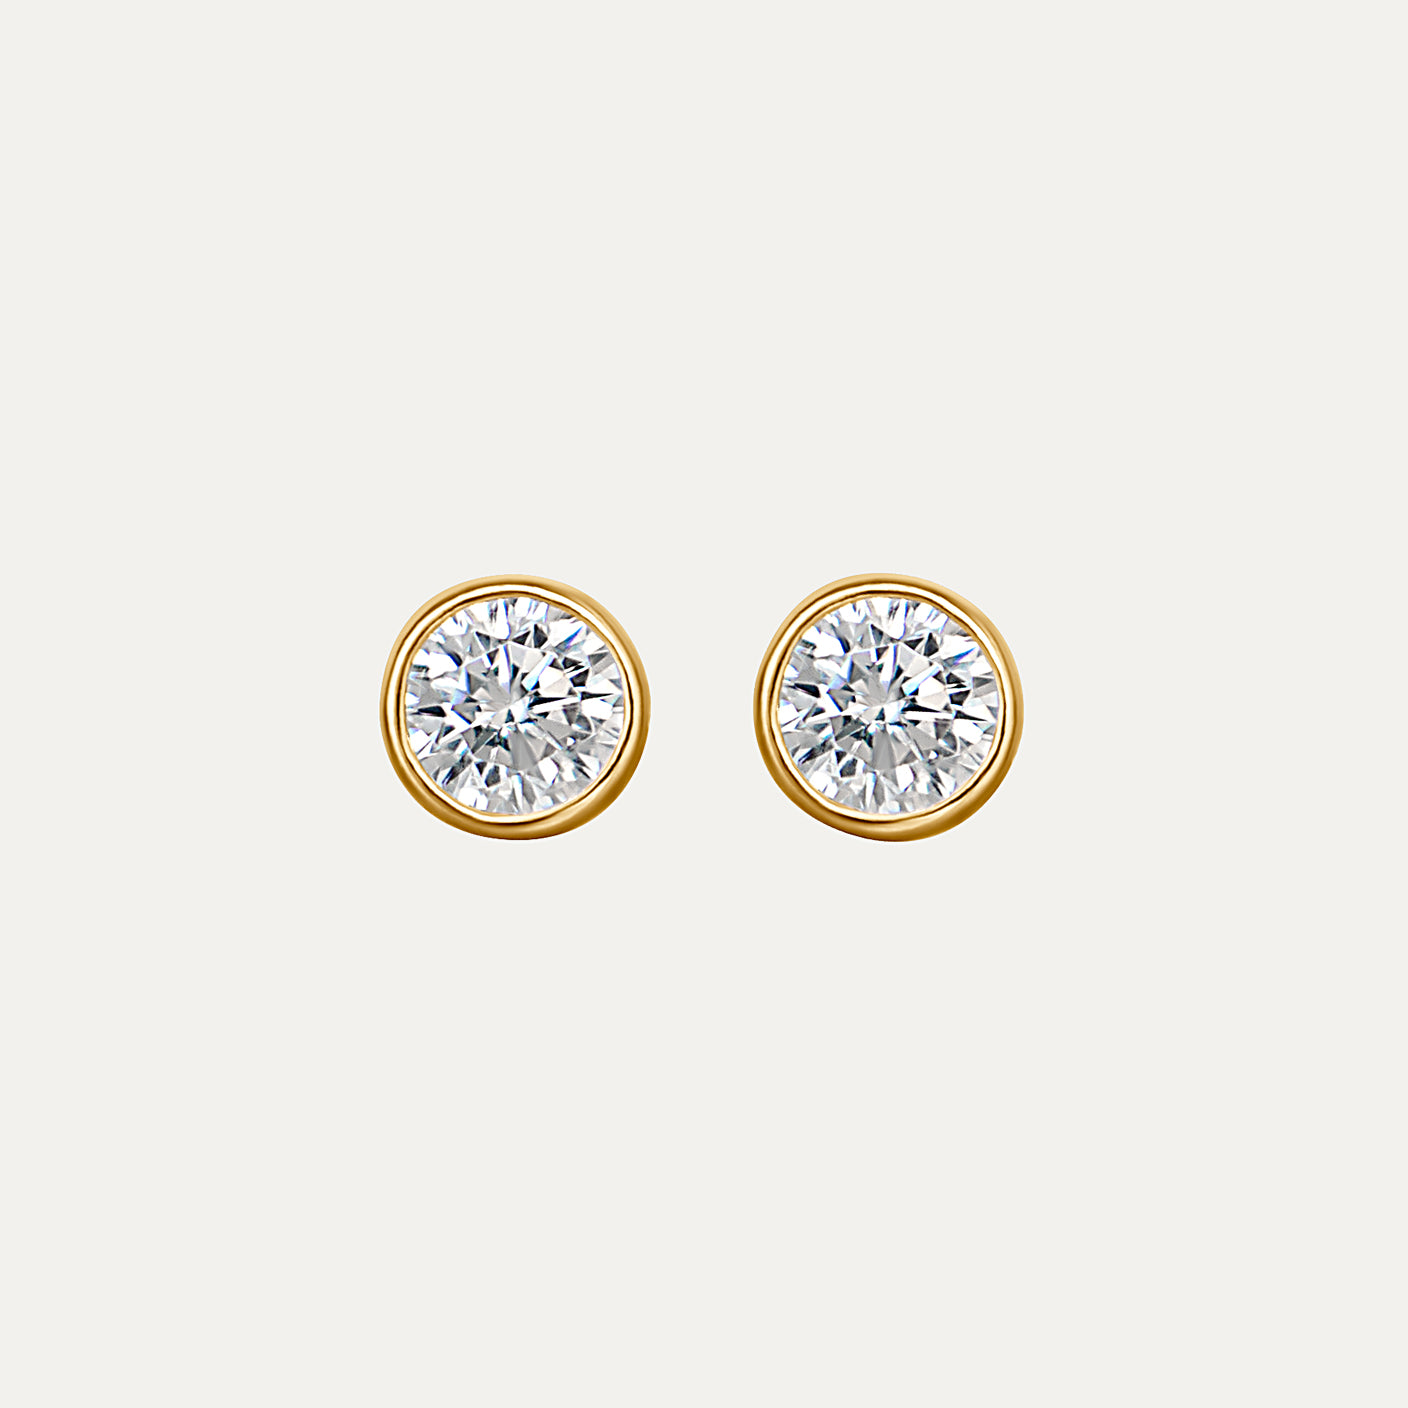 Minimalist Studs and Diamond Earring Trends to Flaunt in 2023